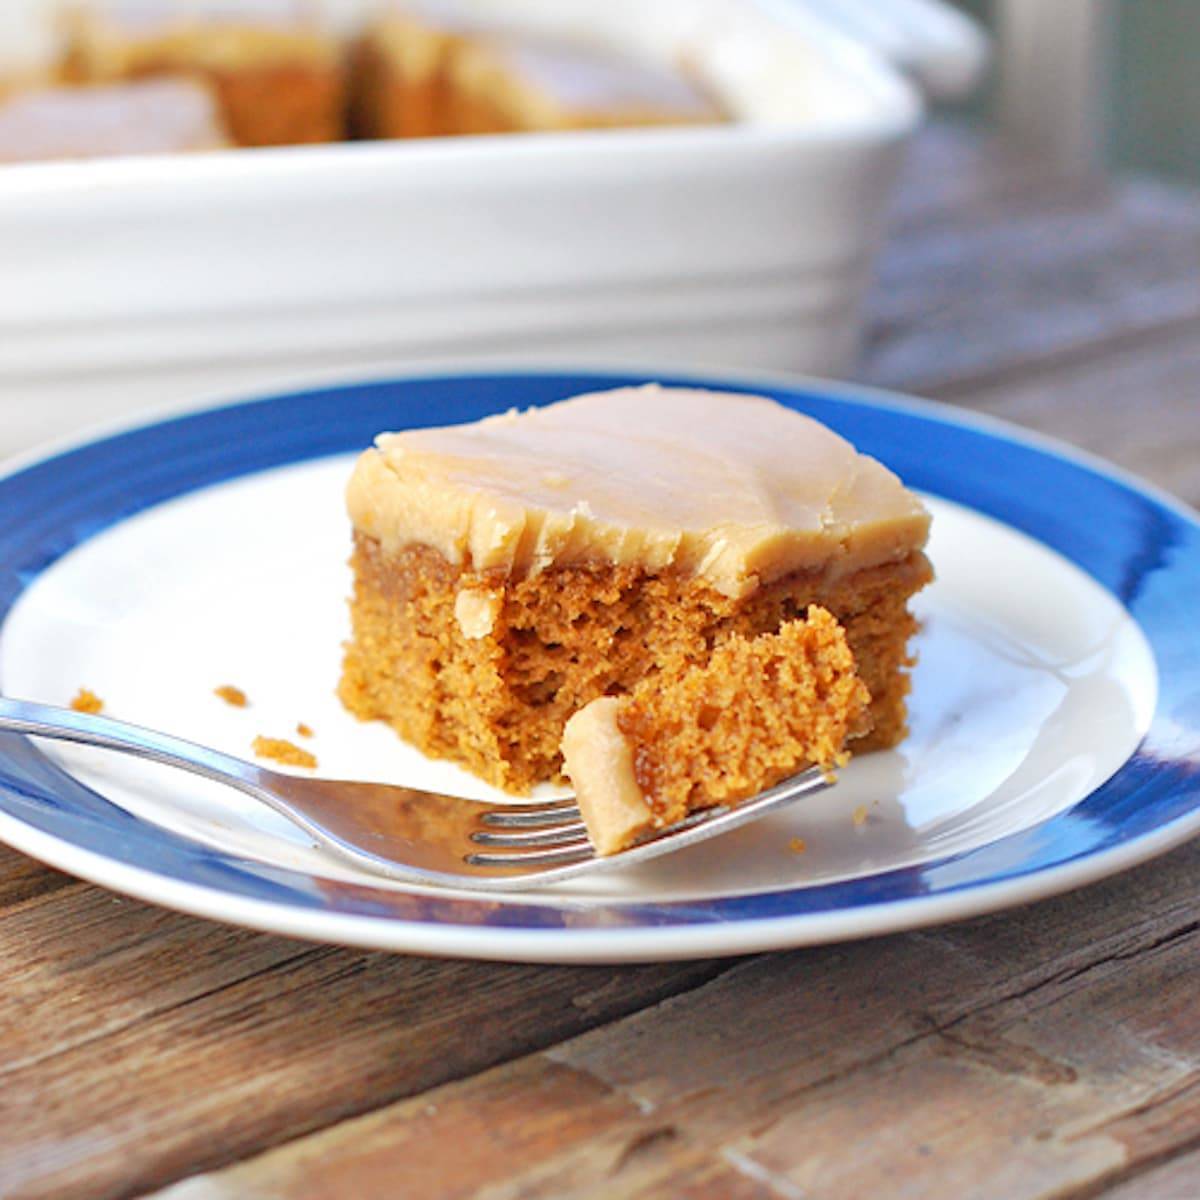 Pumpkin bars topped with this old-fashioned caramel frosting on a blue and white plate.